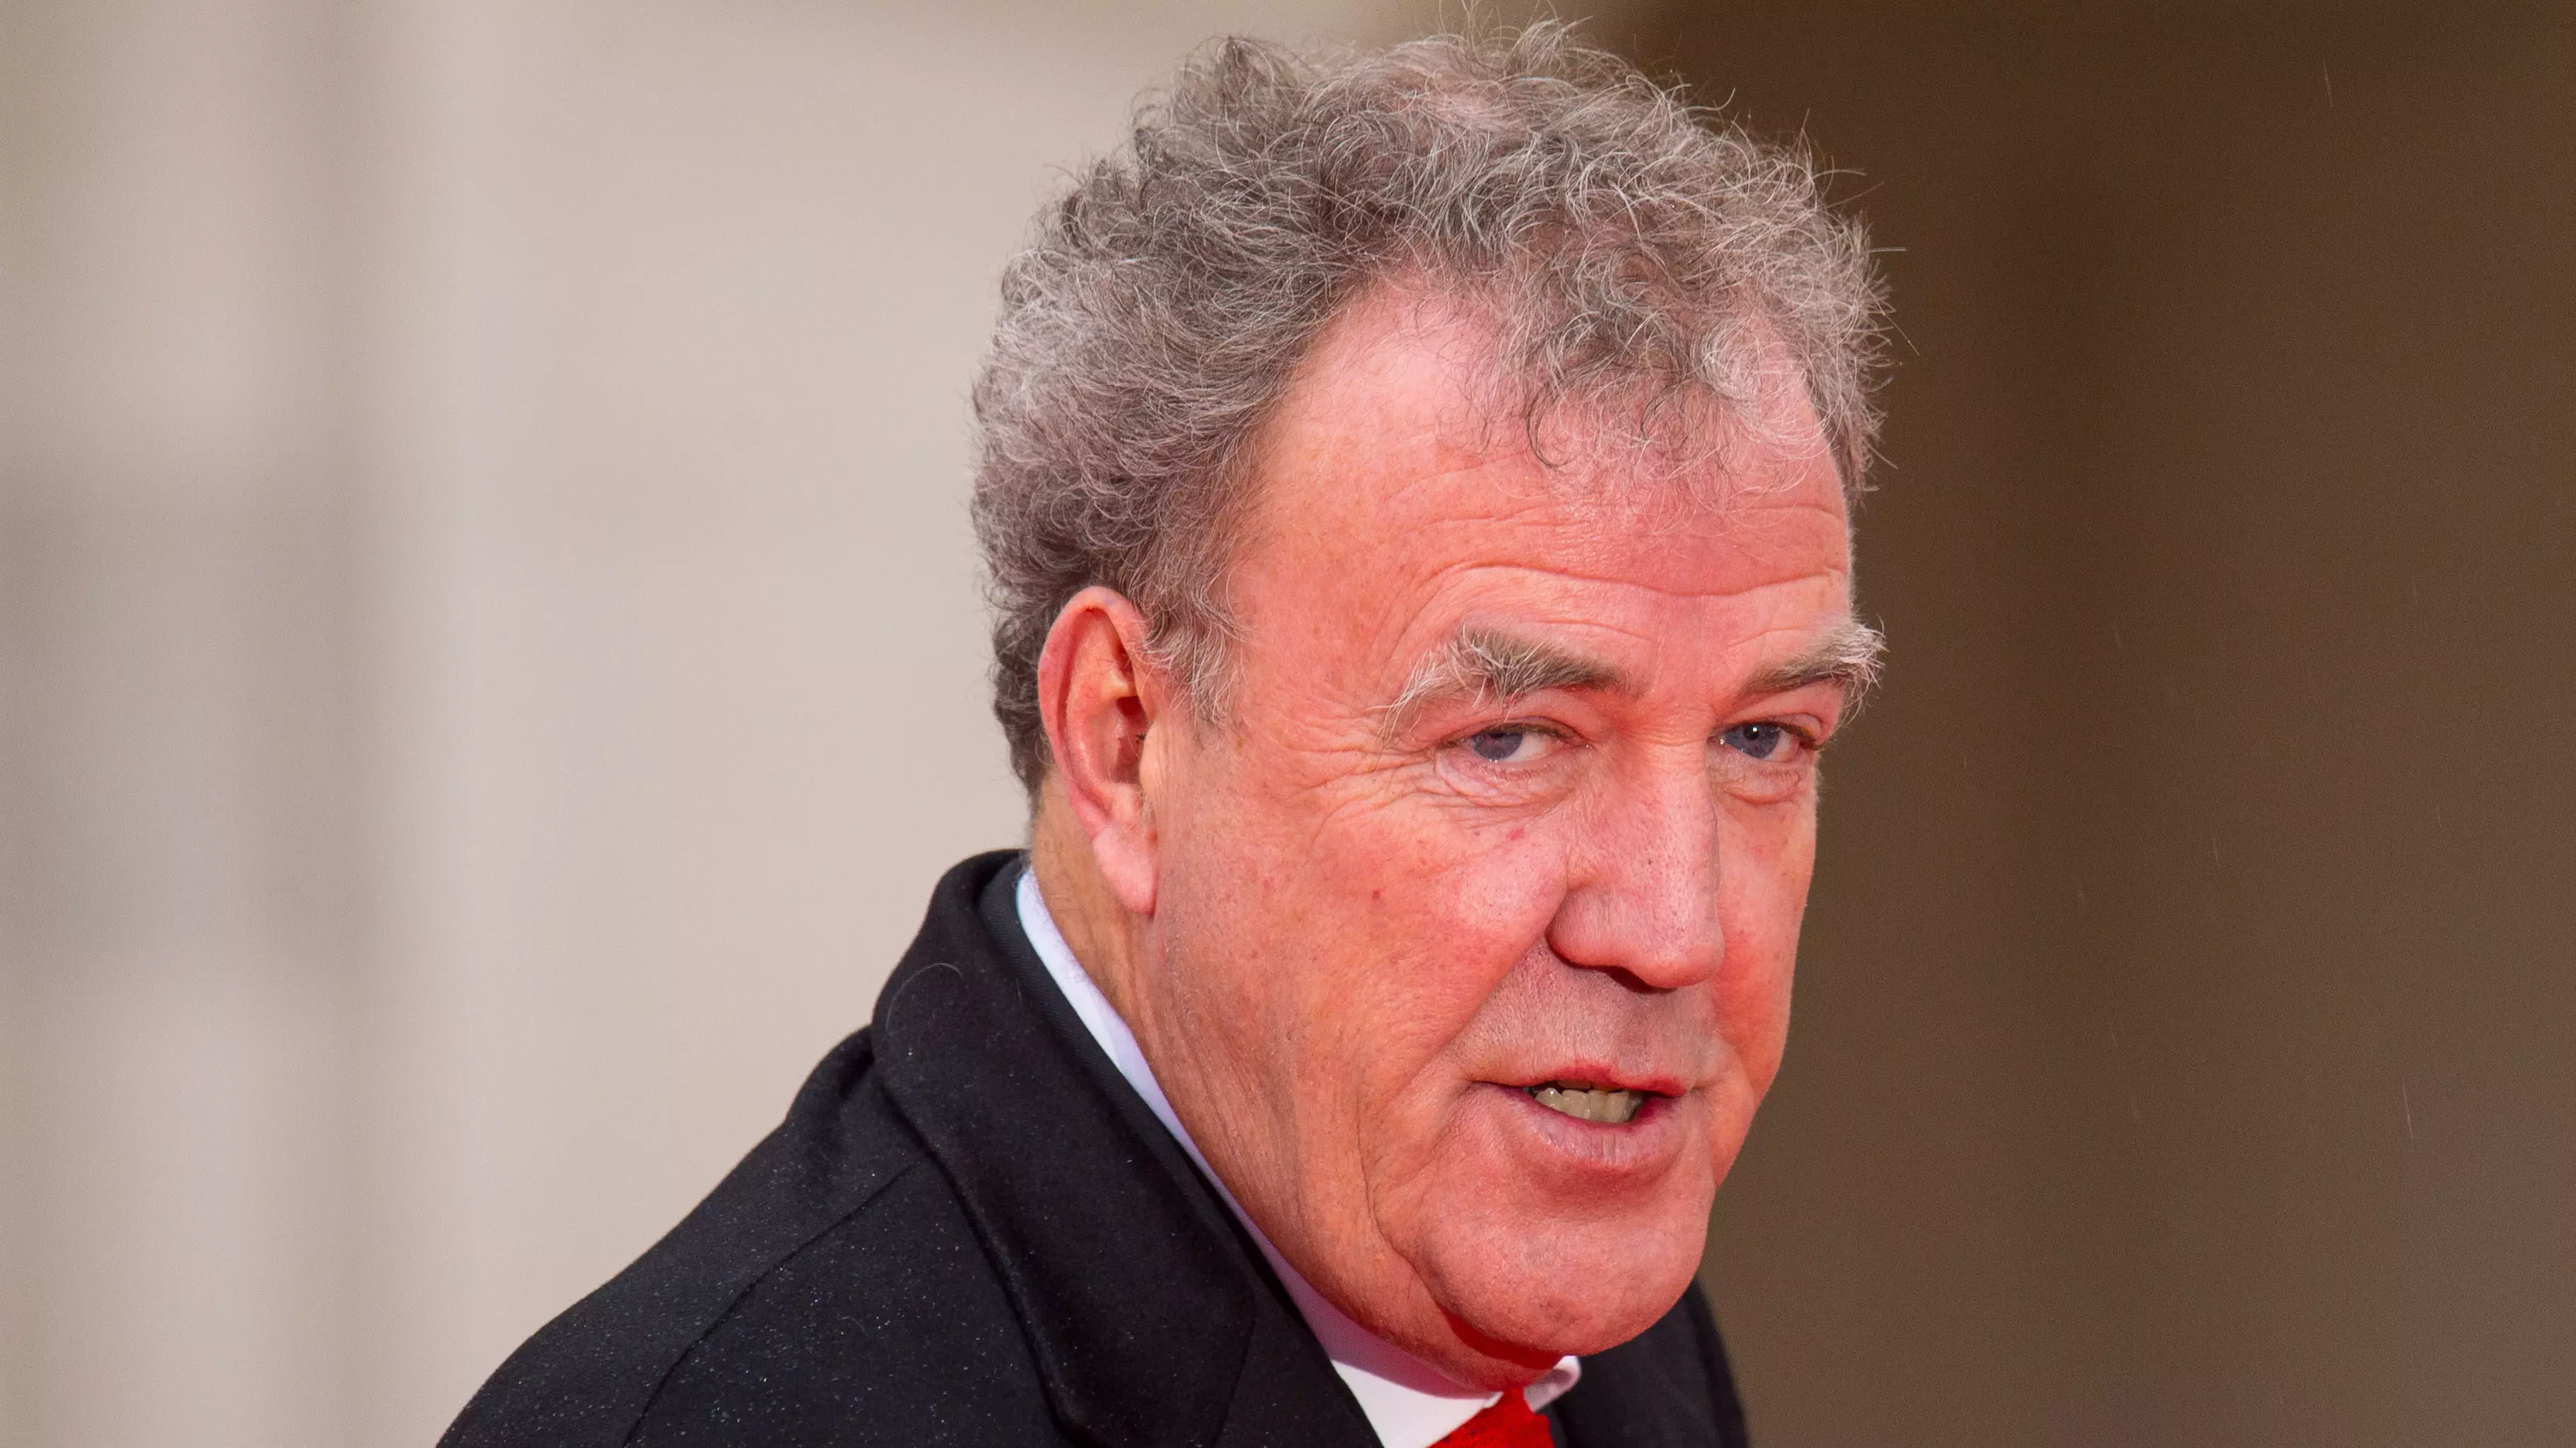 Jeremy Clarkson Has Responded To Liking Those Tweets